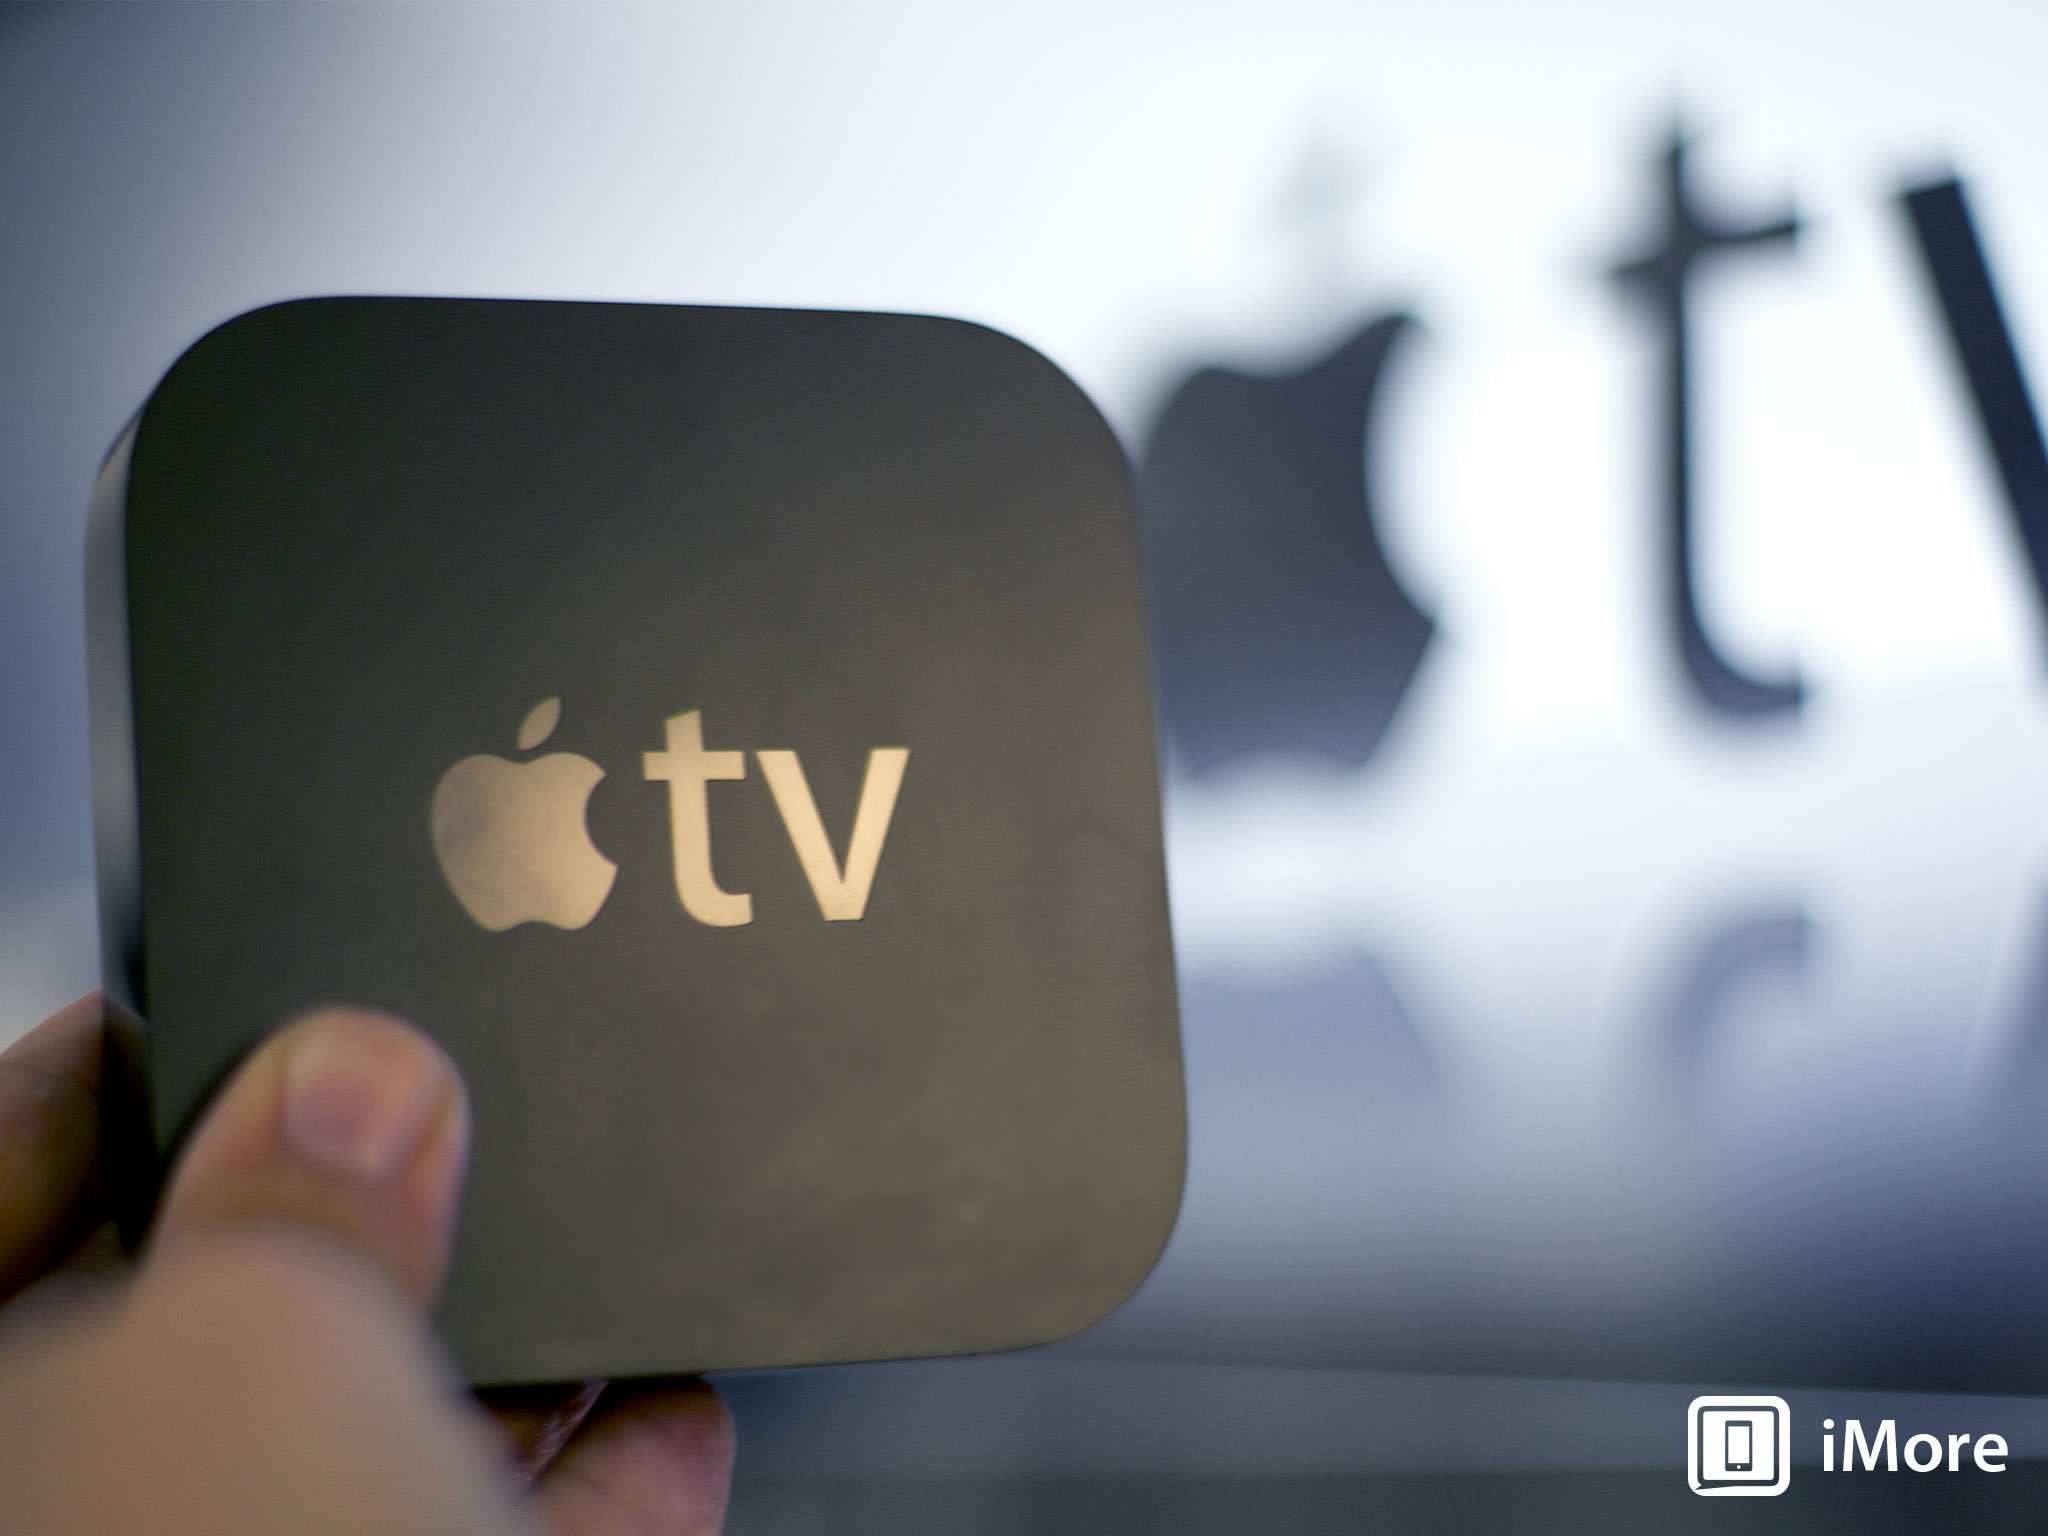 Everything you need to know about Apple's Apple TV set top box, including movies, TV, music, Netflix, HBO, and more!